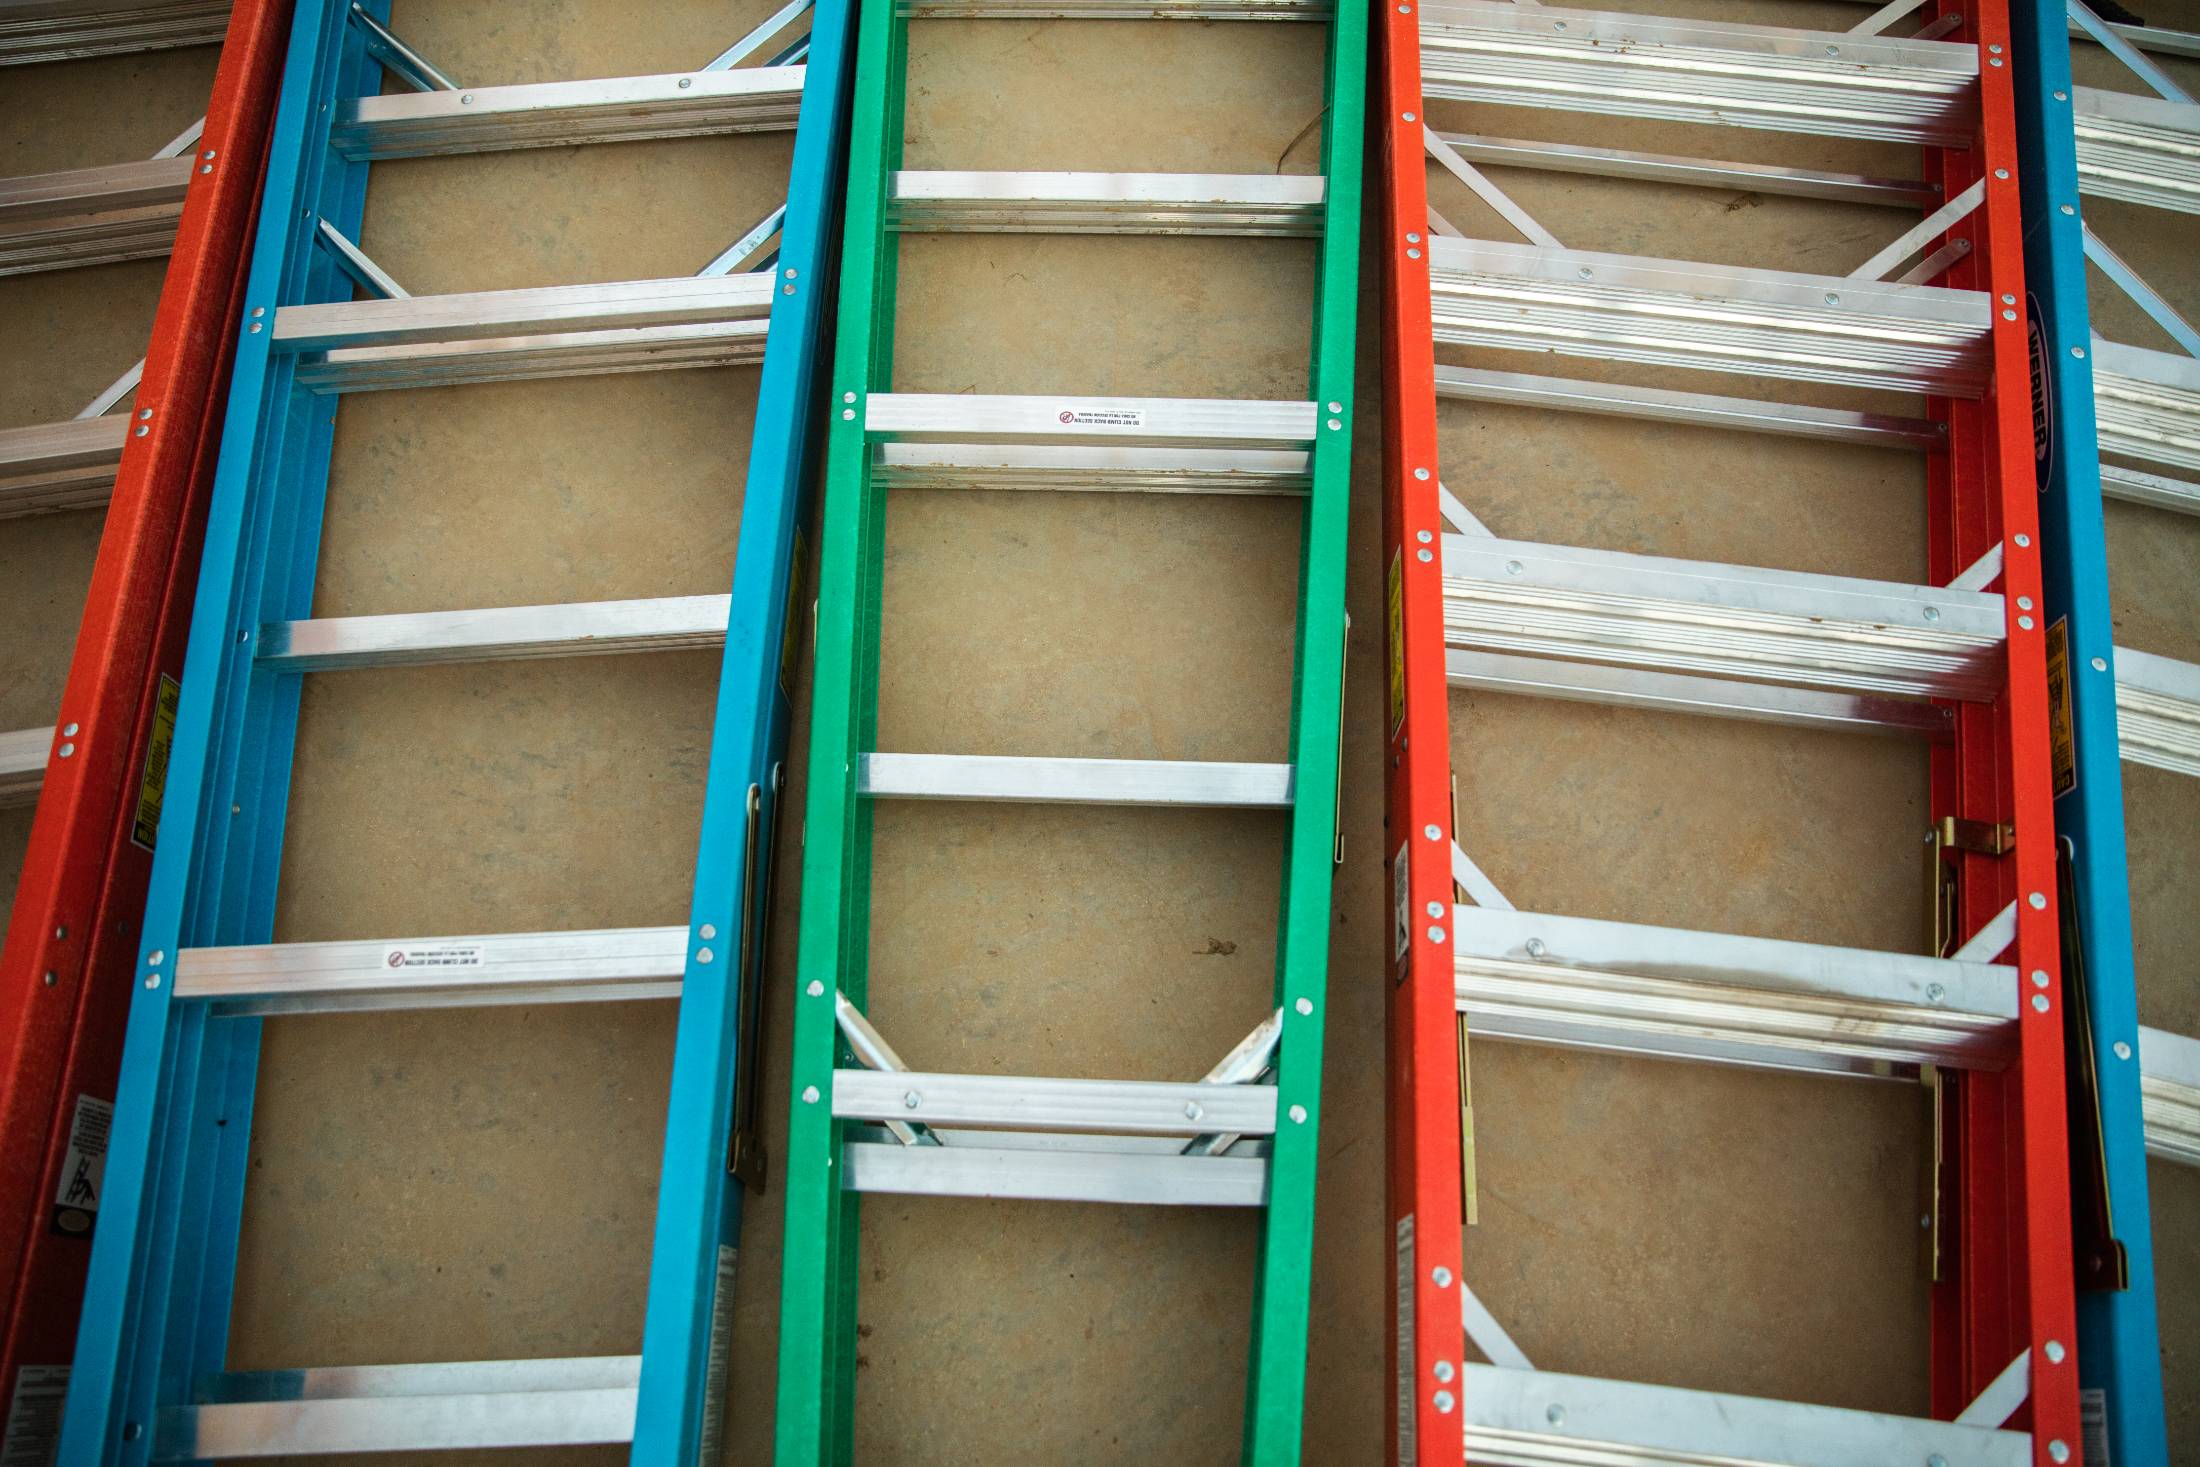 Ladders in different colors